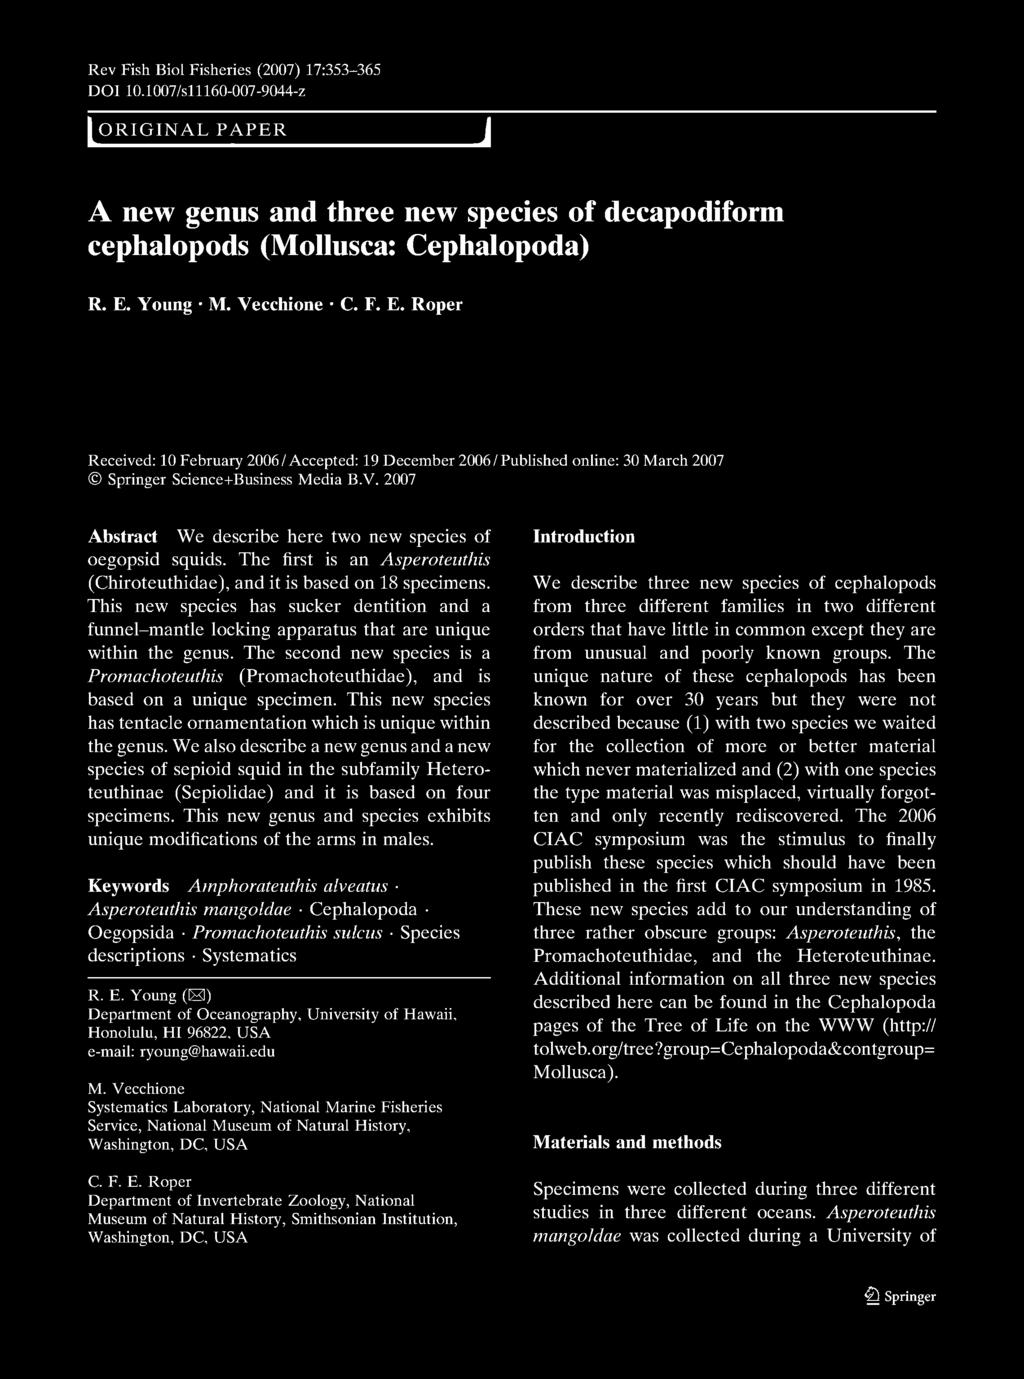 2007 Abstract We describe here two new species of oegopsid squids. The first is an Asperoteuthis (Chiroteuthidae), and it is based on 18 specimens.